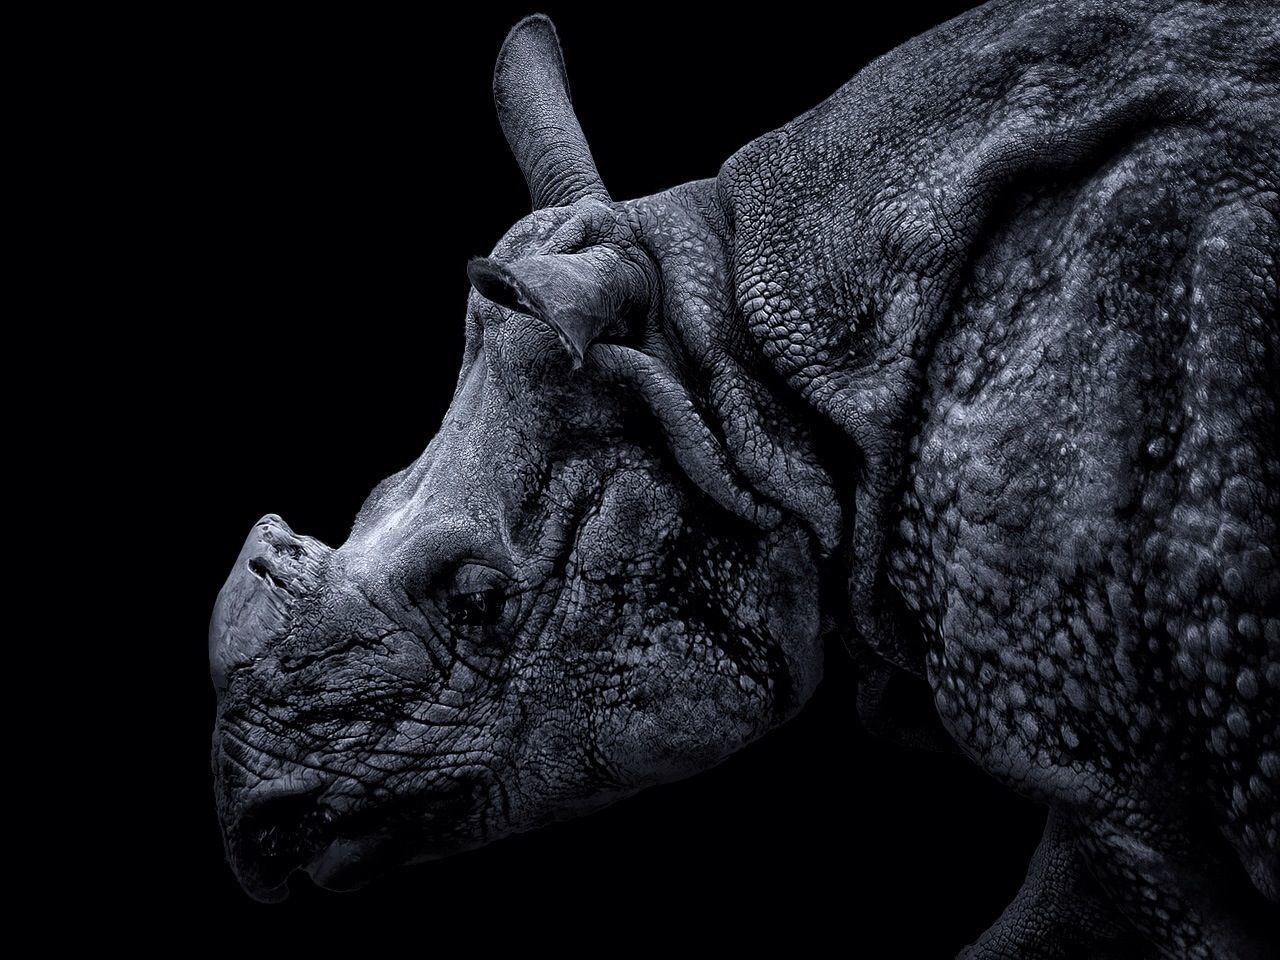 Close-up side view of rhinoceros over black background